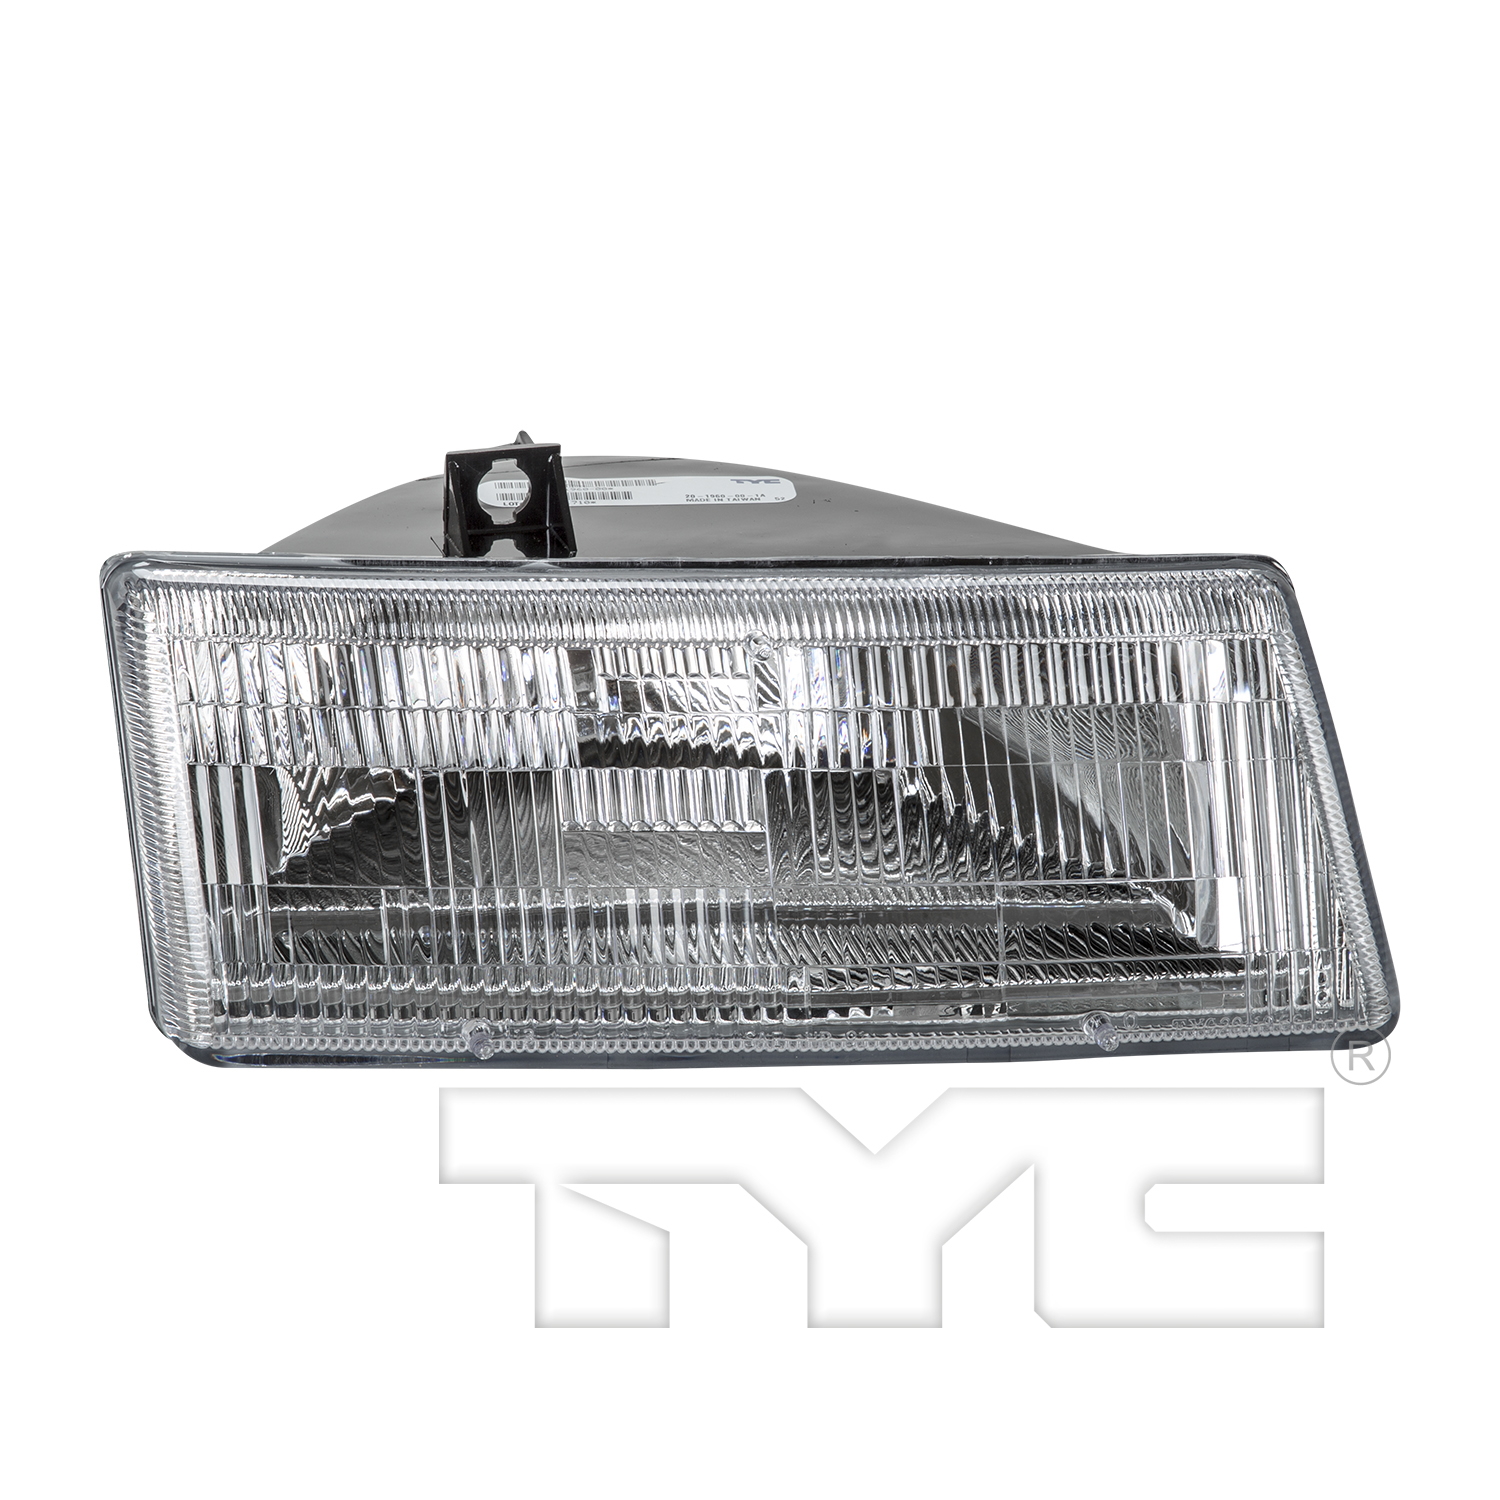 Aftermarket HEADLIGHTS for CHRYSLER - TOWN & COUNTRY, TOWN & COUNTRY,91-95,RT Headlamp lens/housing